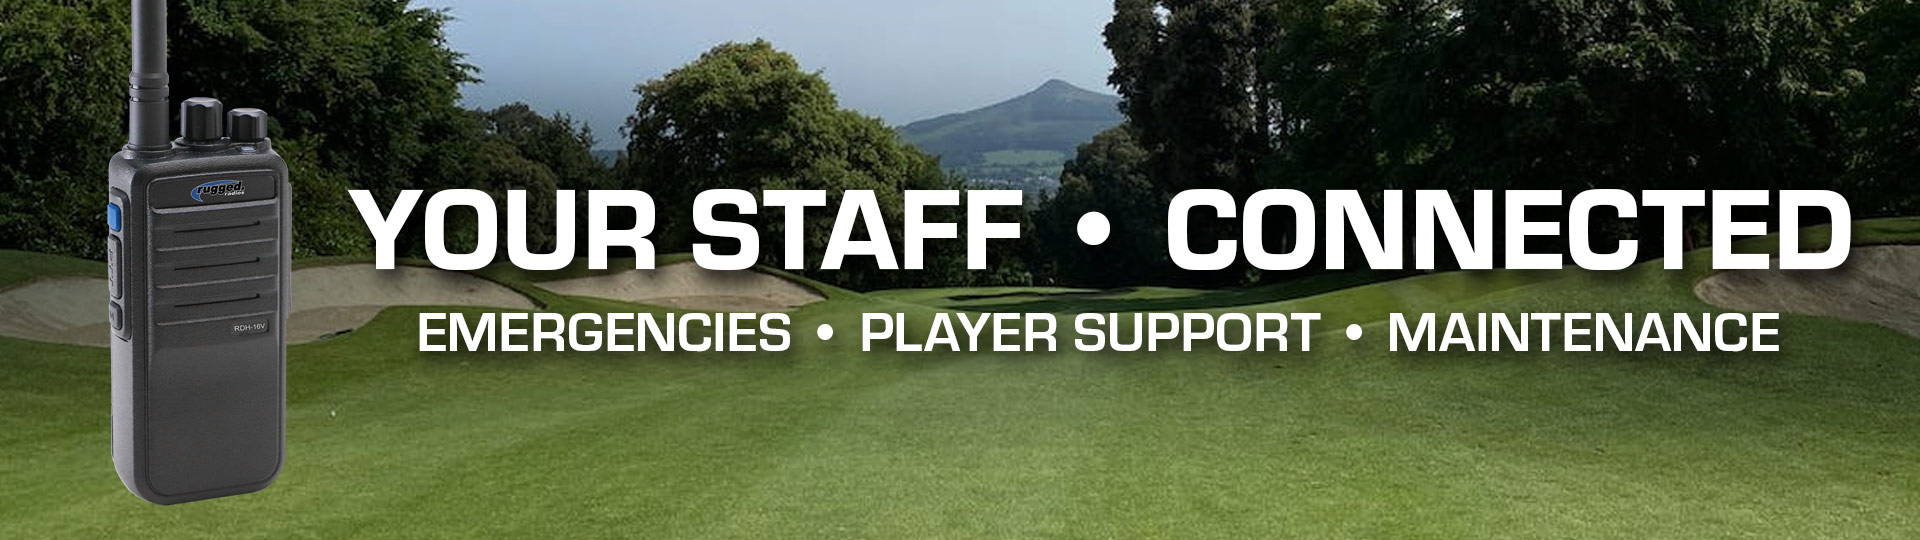 You Staff Connected, the Perfect Two-Way Radio for Golf Courses and Country Clubs